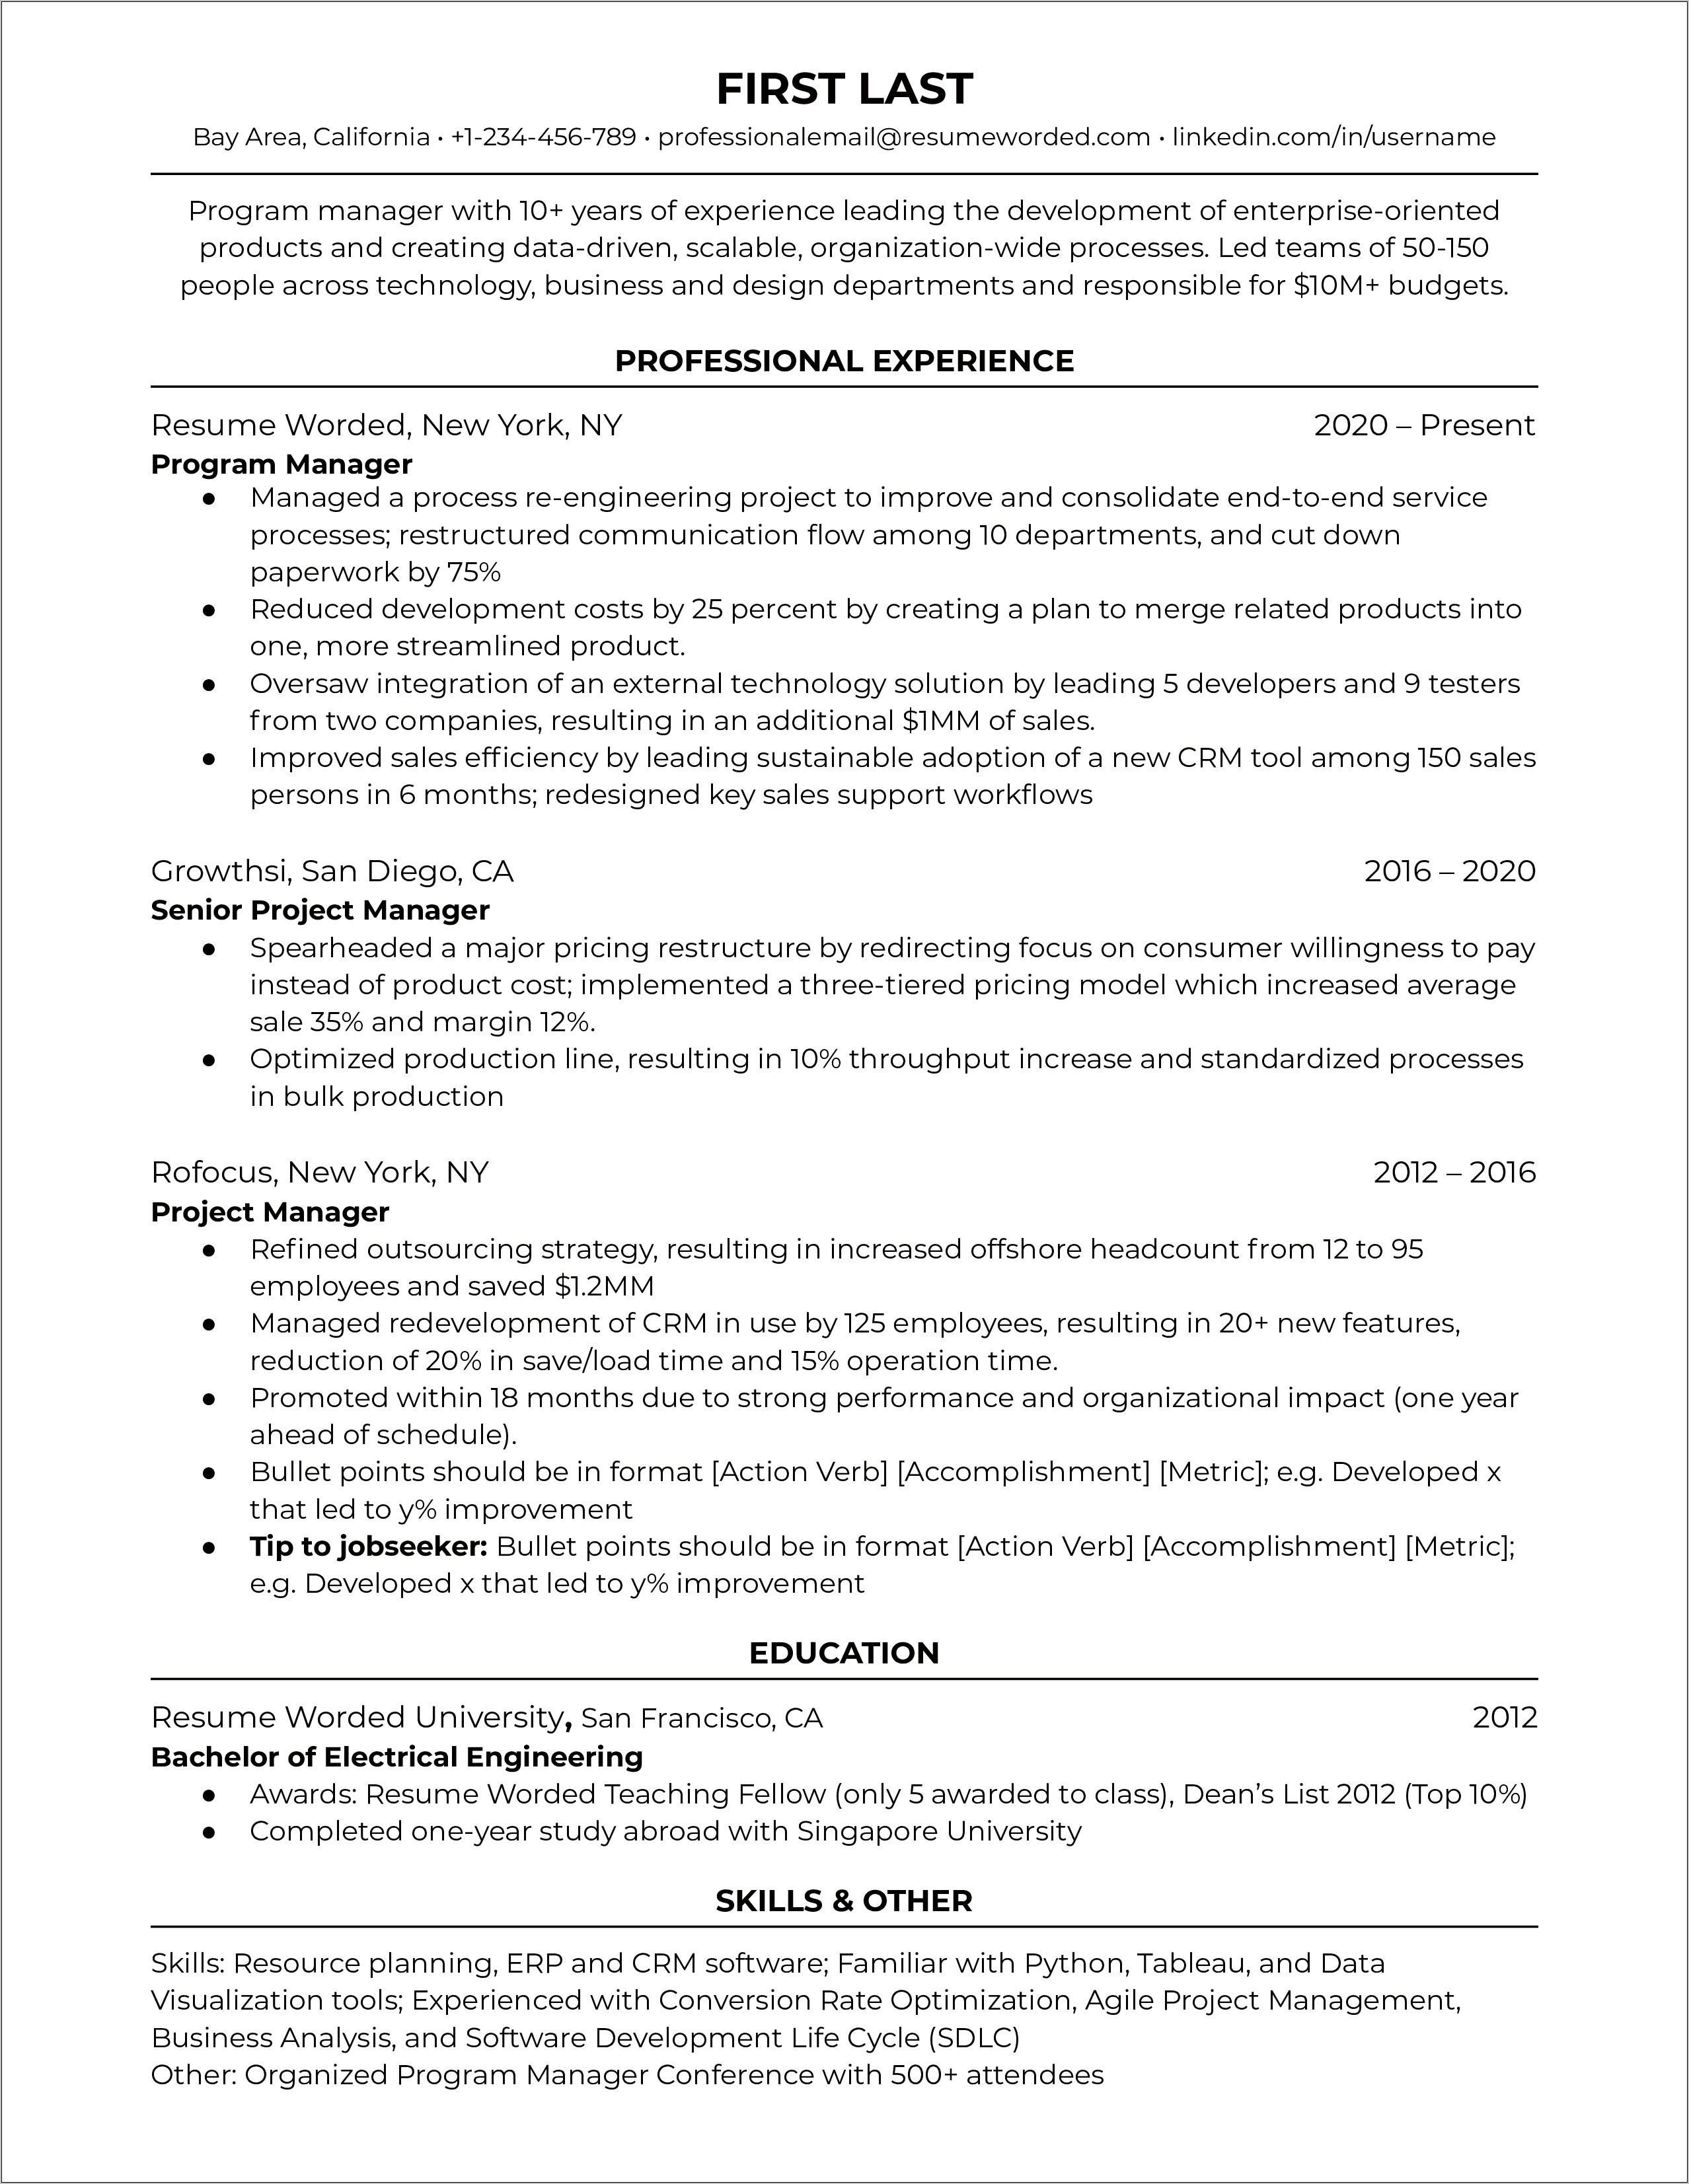 Program Manager Who Became Product Manager Resume